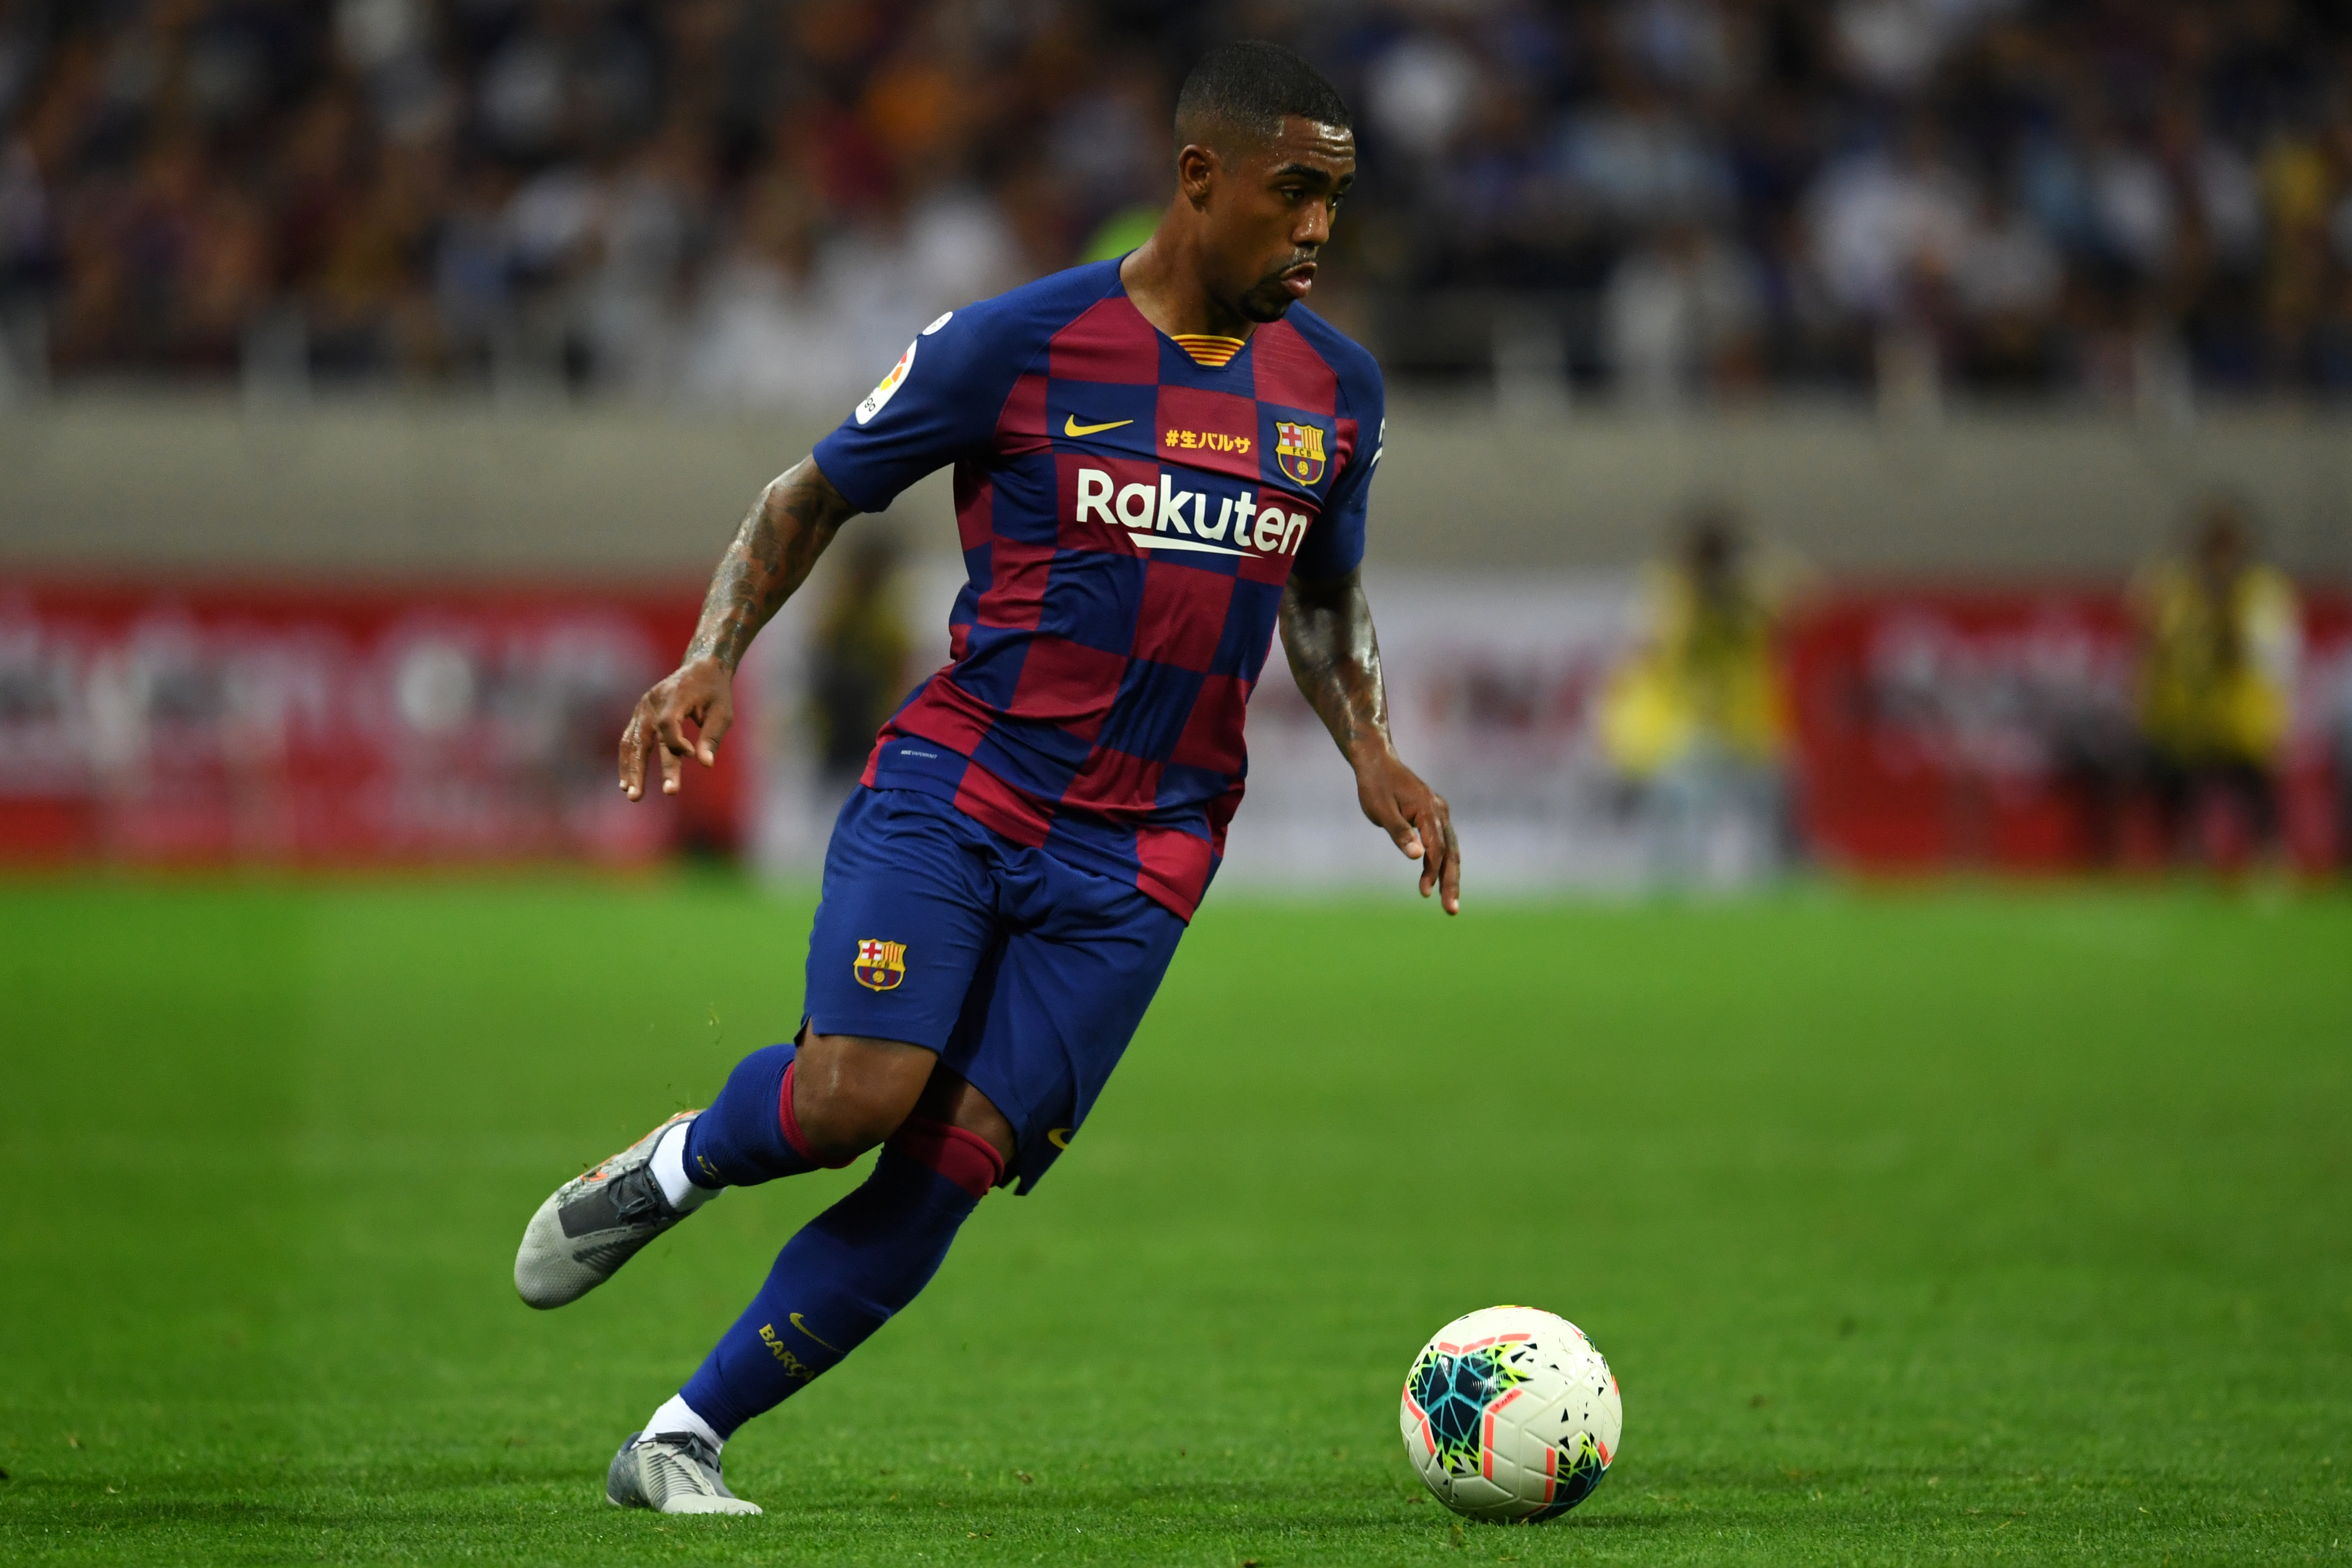 Lionel Messi’s quality is covering up issues at Barcelona, confesses Malcom